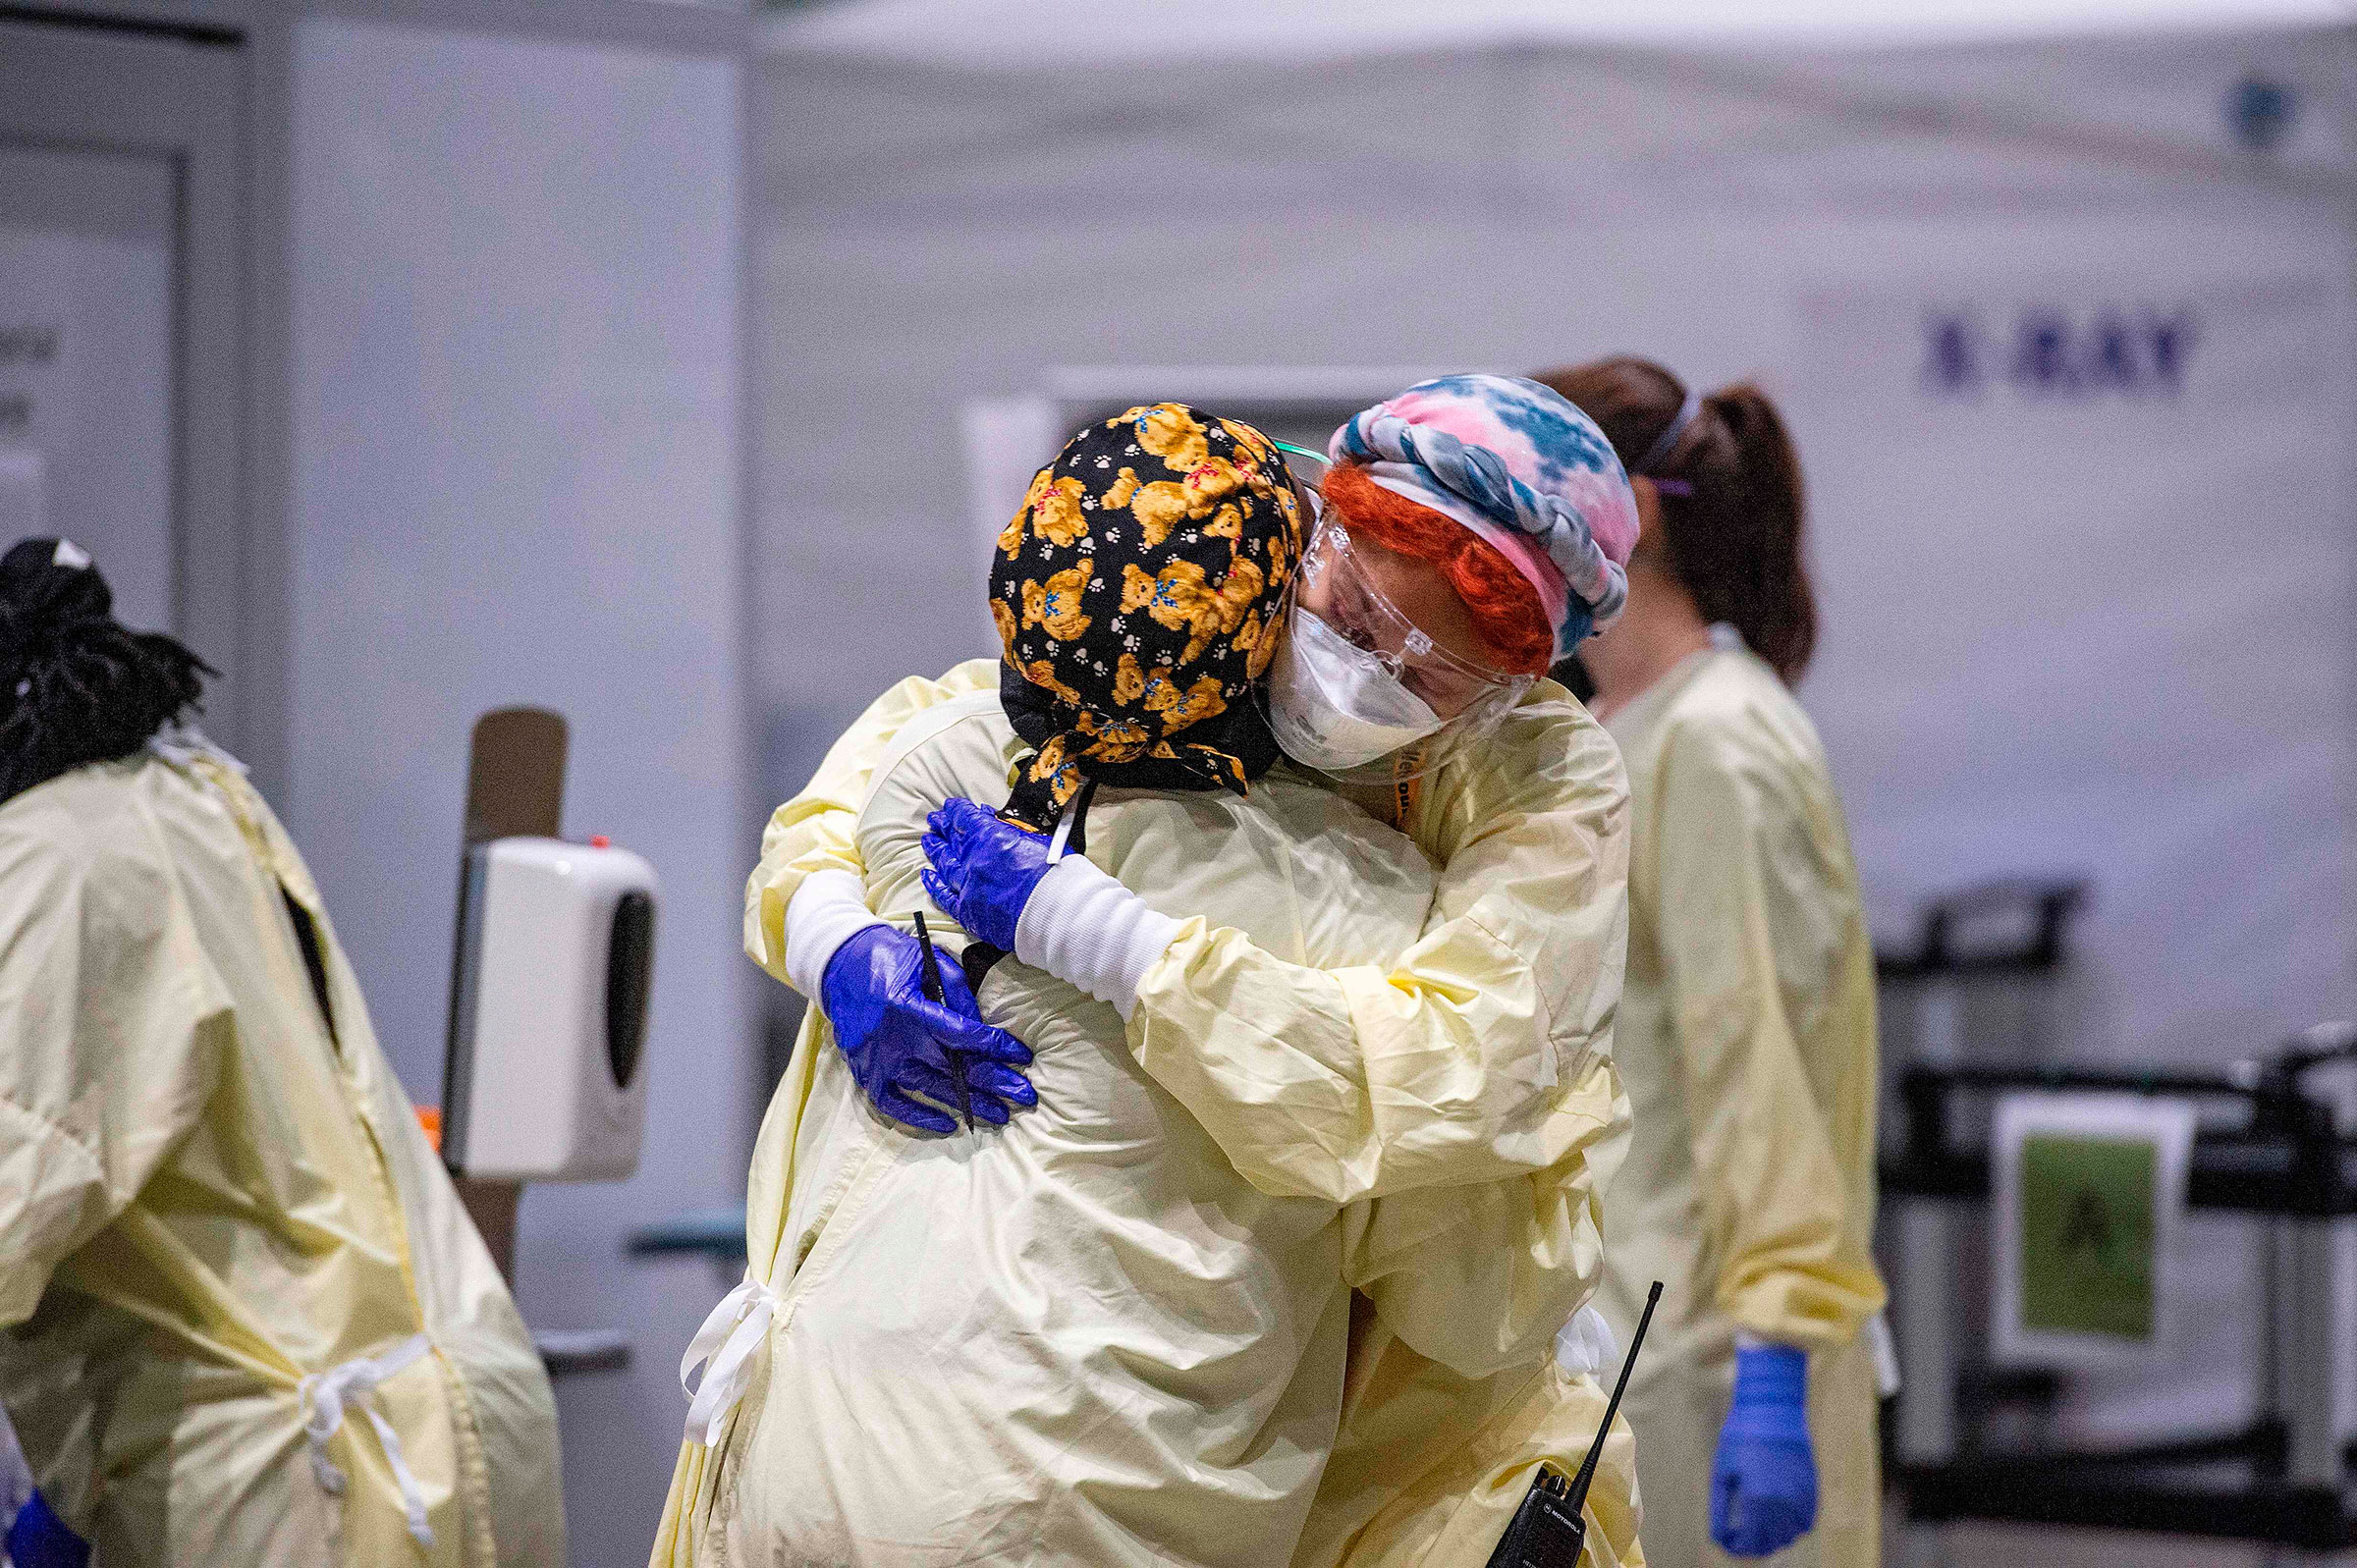 Medical worker Margaret Watkins embraces co-worker Shelly Burke as part of their morning therapy inside the hot zone where medical staff monitor and treat sick patients infected with Covid-19 at the UMASS Memorial DCU Center Field Hospital in Worcester, Mass. on Jan. 13, 2021.